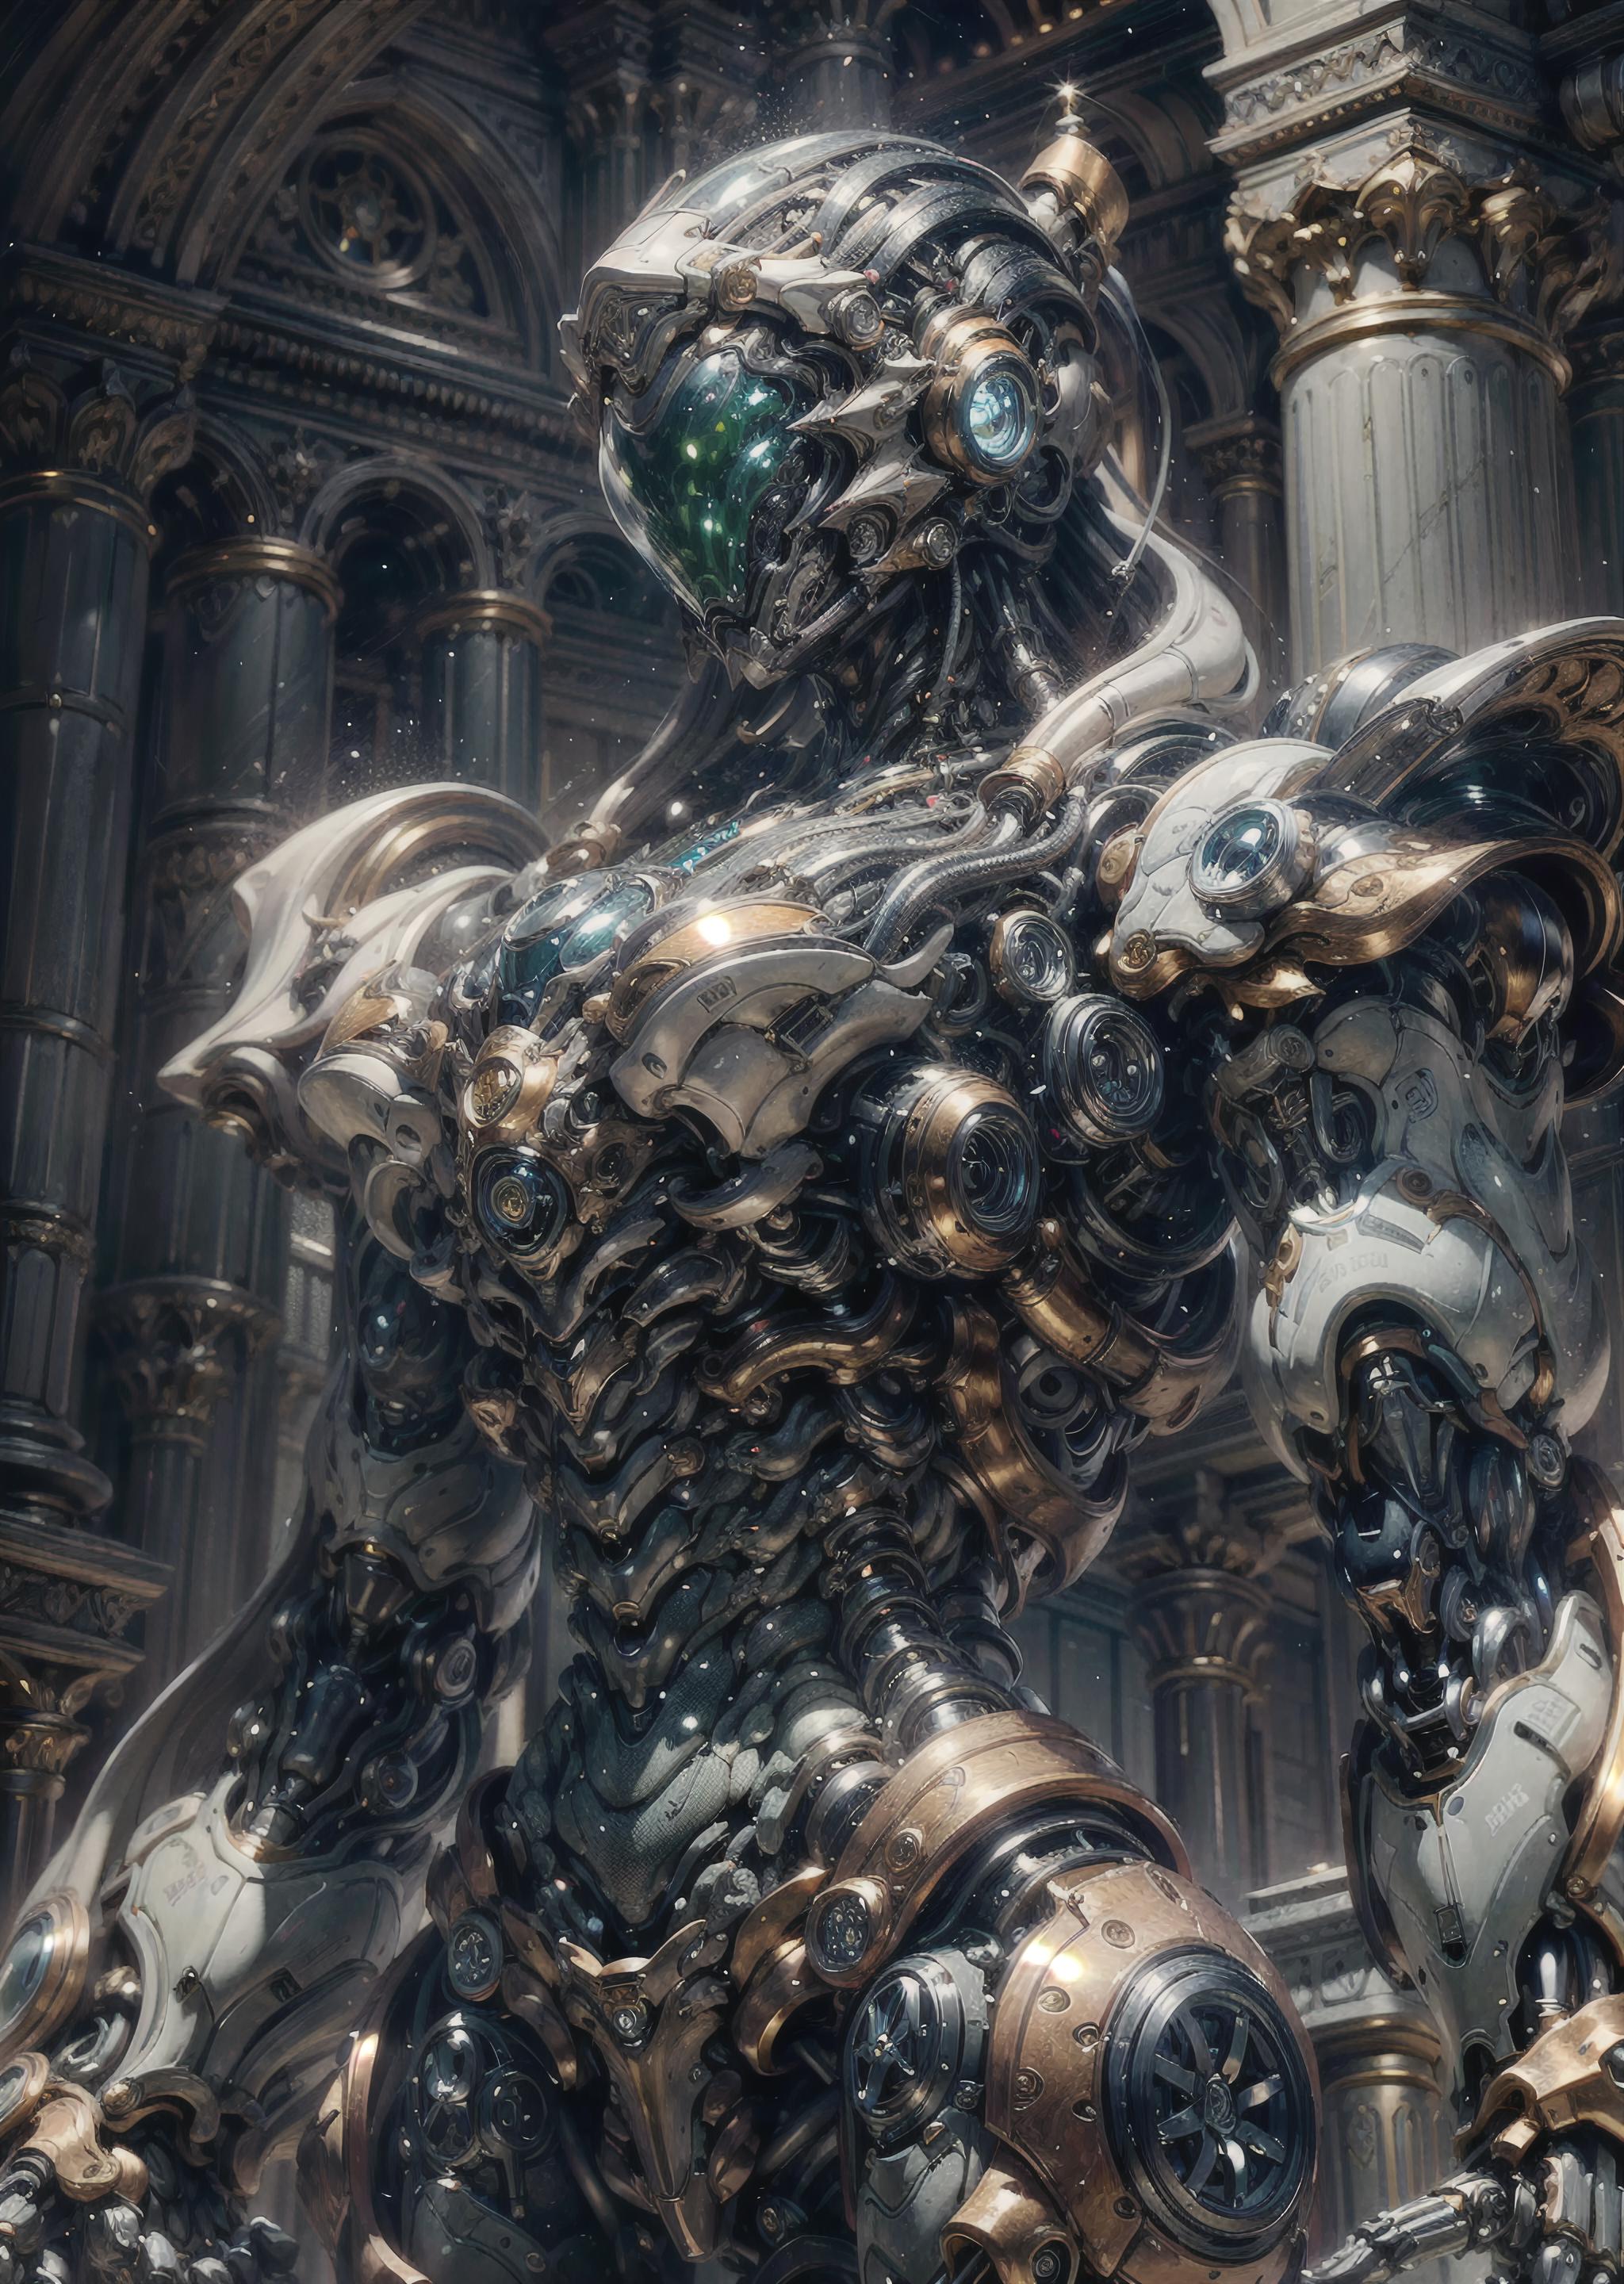 A Robotic Warrior with a Gold and Silver Finish, Standing in a Gothic Cathedral